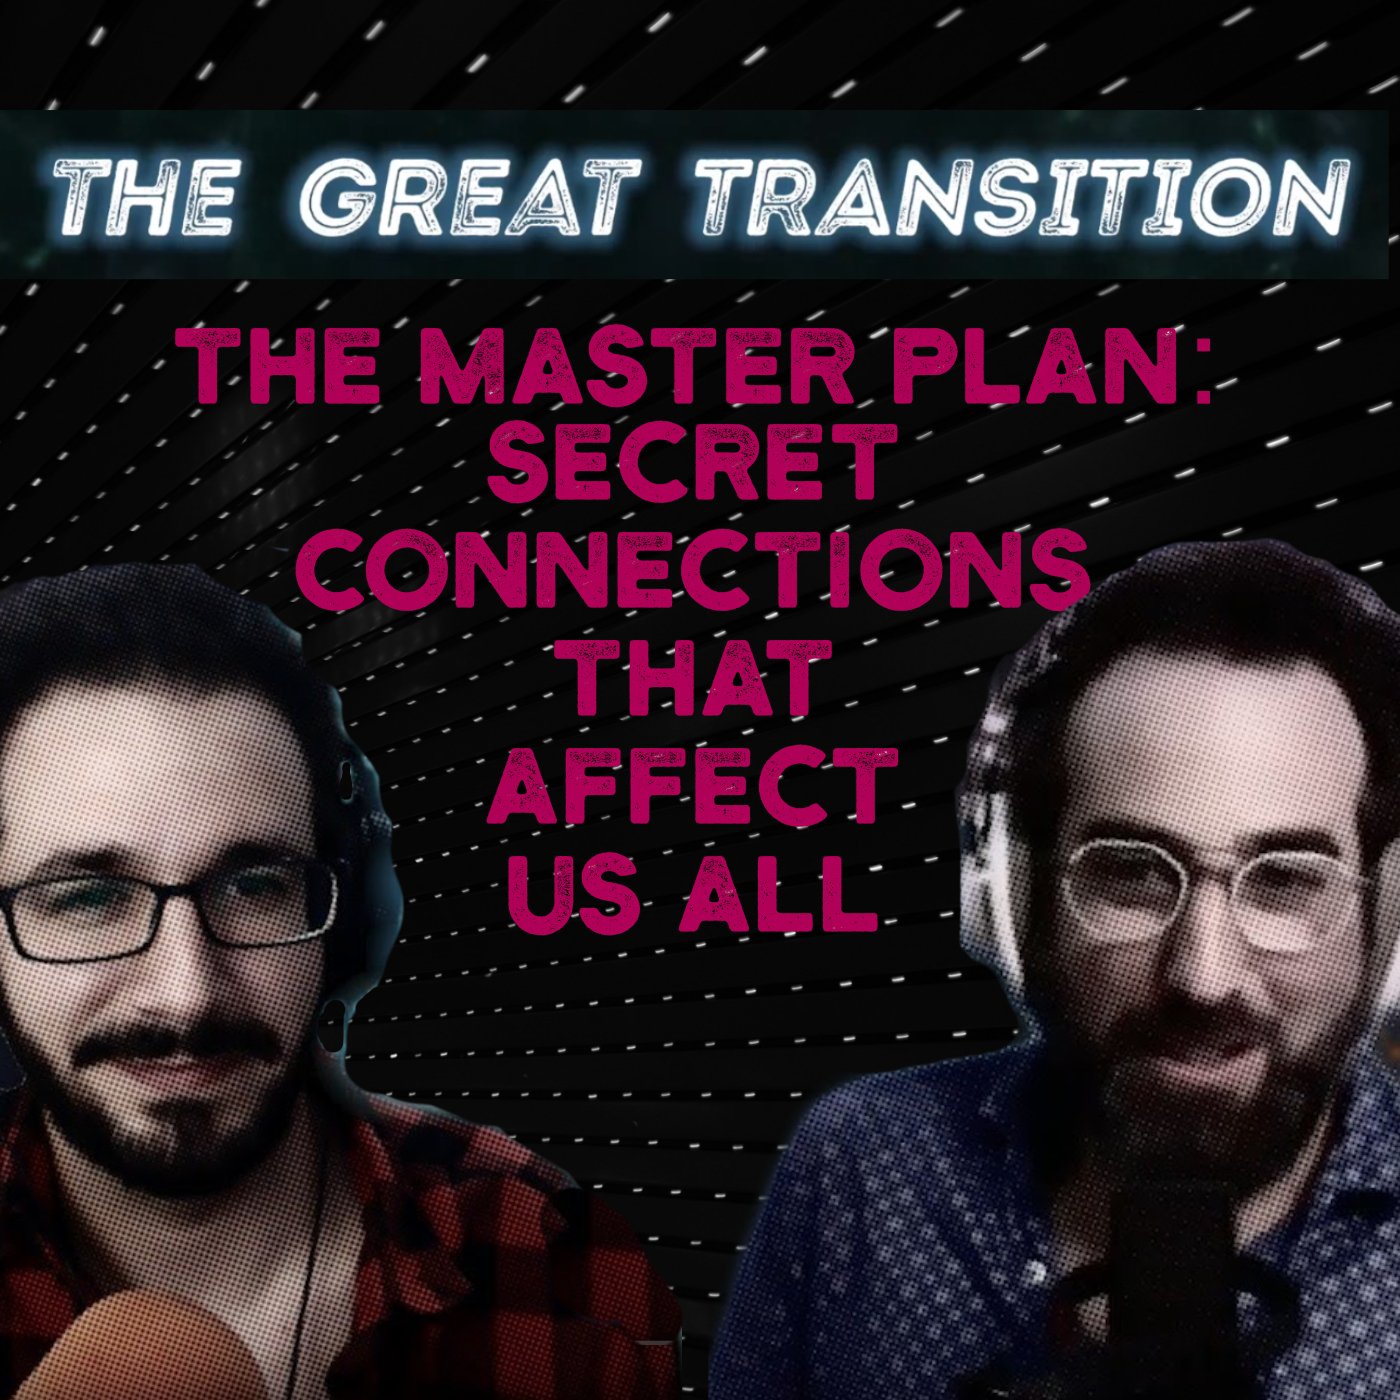 The Great Transition - The Master Plan: Secret Connections That Affect Us All